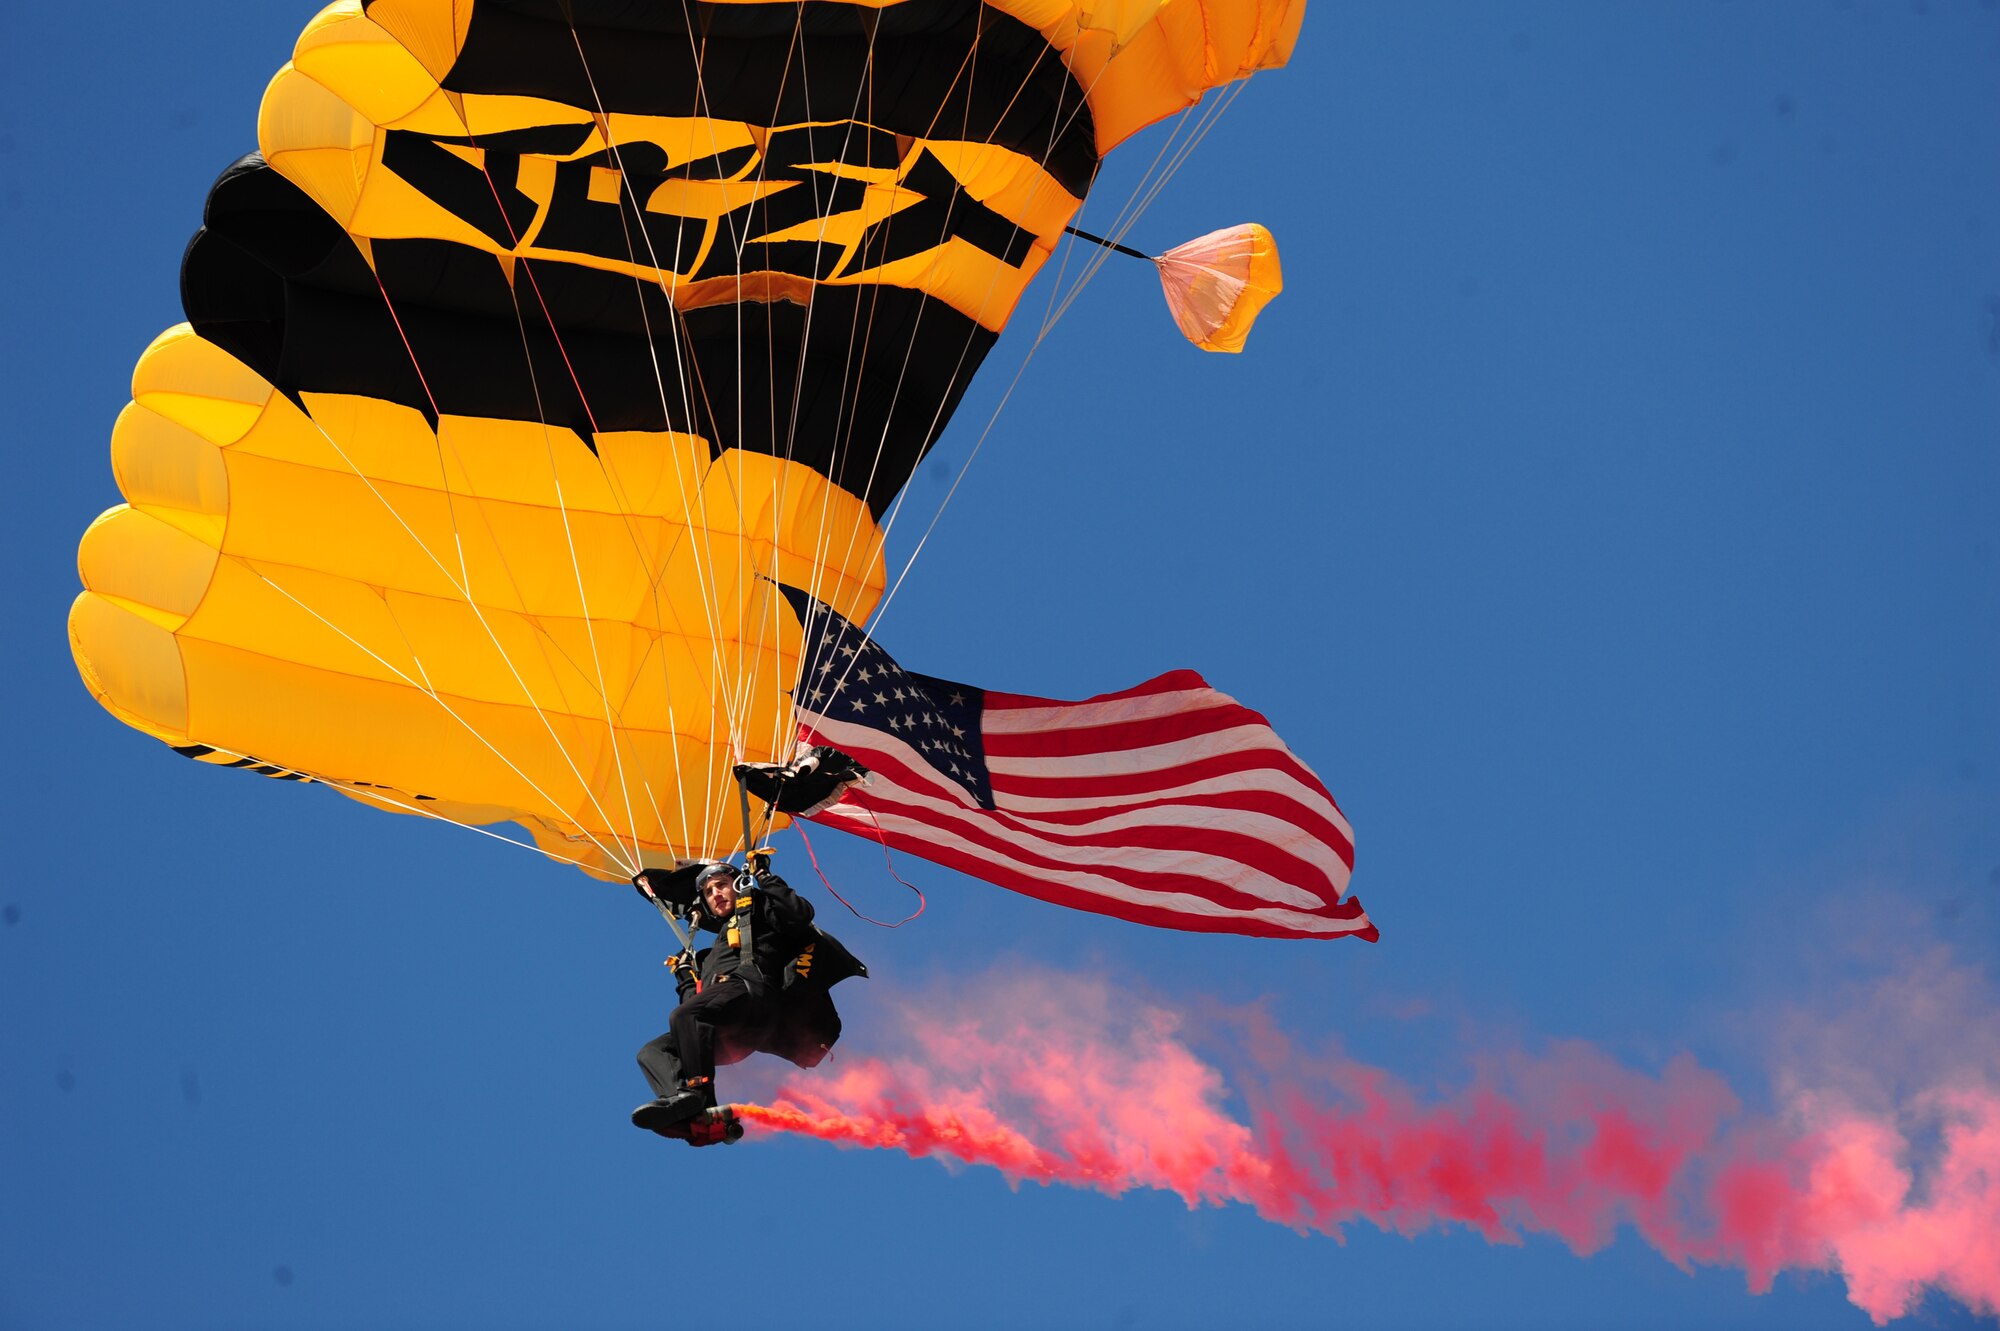 SEYMOUR JOHNSON AIR FORCE BASE, N.C. -- U.S. Army Specialist Matthew Navarro glides to the ground with the American flag during the opening ceremony of the Wings Over Wayne Air Show and Open House here, April 17, 2011. Specialist Navarro performs with the U.S. Army Golden Knights Black Demonstration team. He hails from Lecanto, Fla. (U.S. Air Force photo/Senior Airman Rae Perry) (RELEASED)